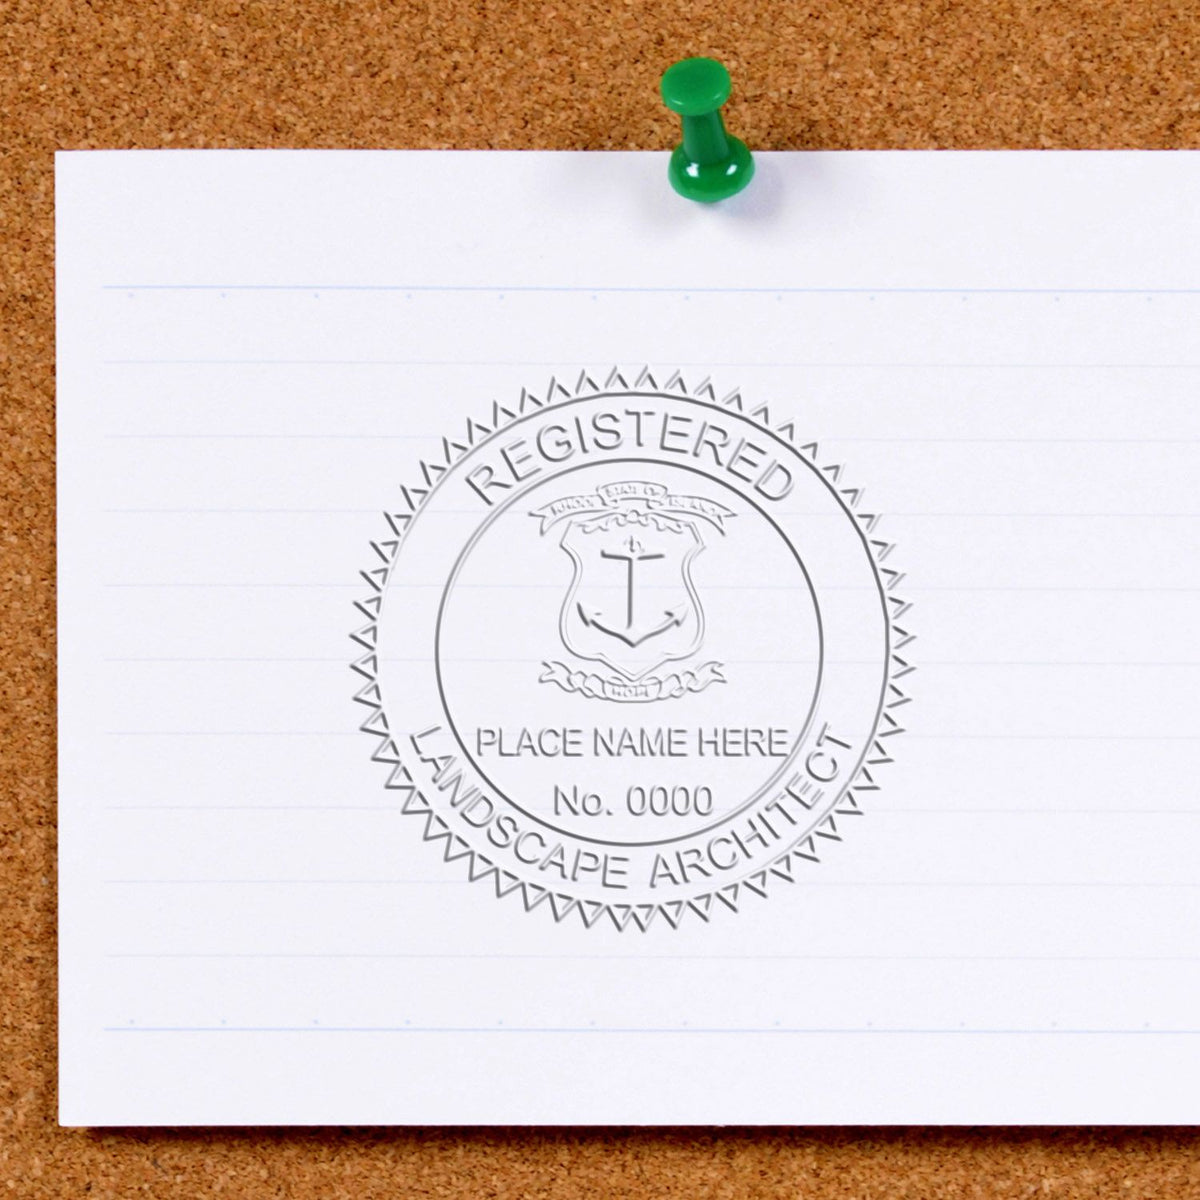 An alternative view of the Gift Rhode Island Landscape Architect Seal stamped on a sheet of paper showing the image in use